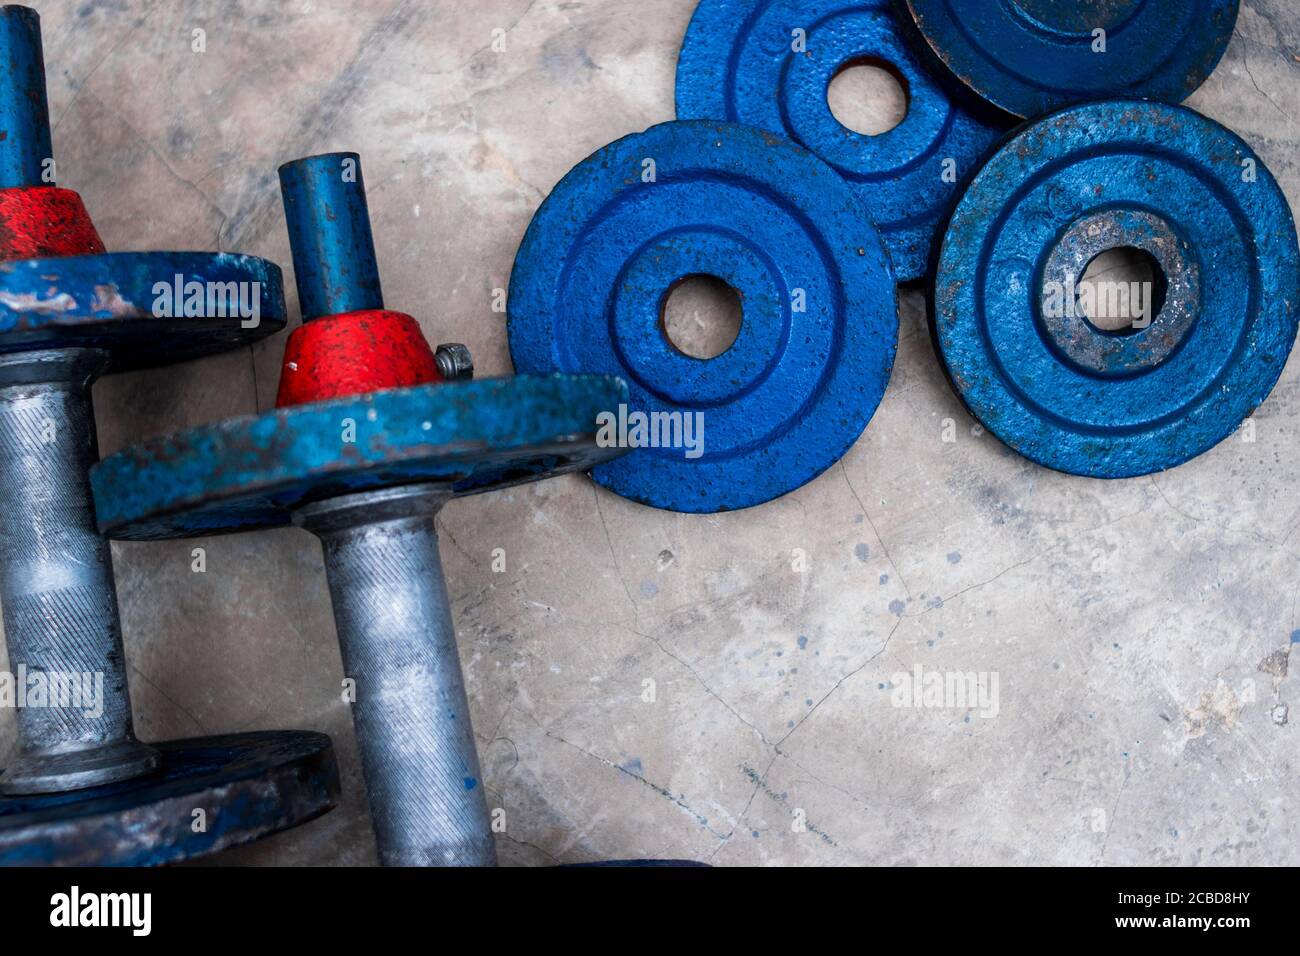 Old blue gym weights on the floor in a gym Stock Photo